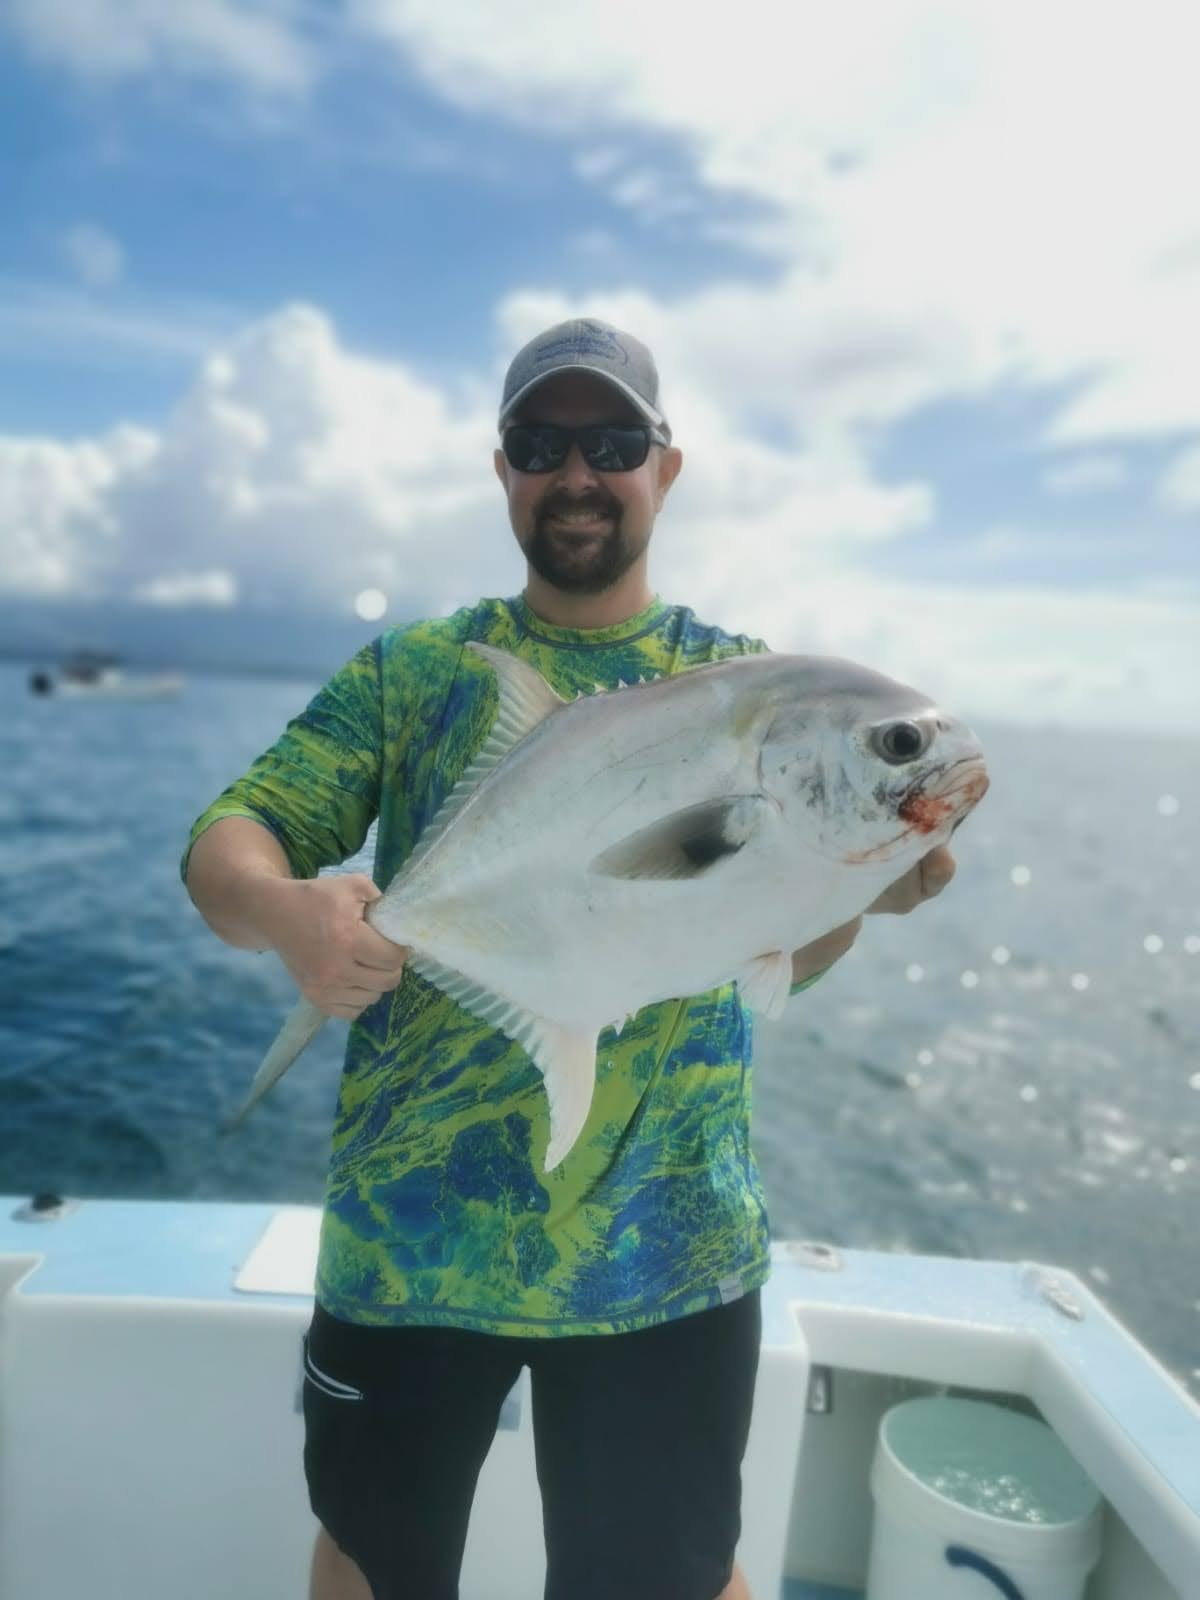 Are permit or African Pompano good to eat? - The Hull Truth